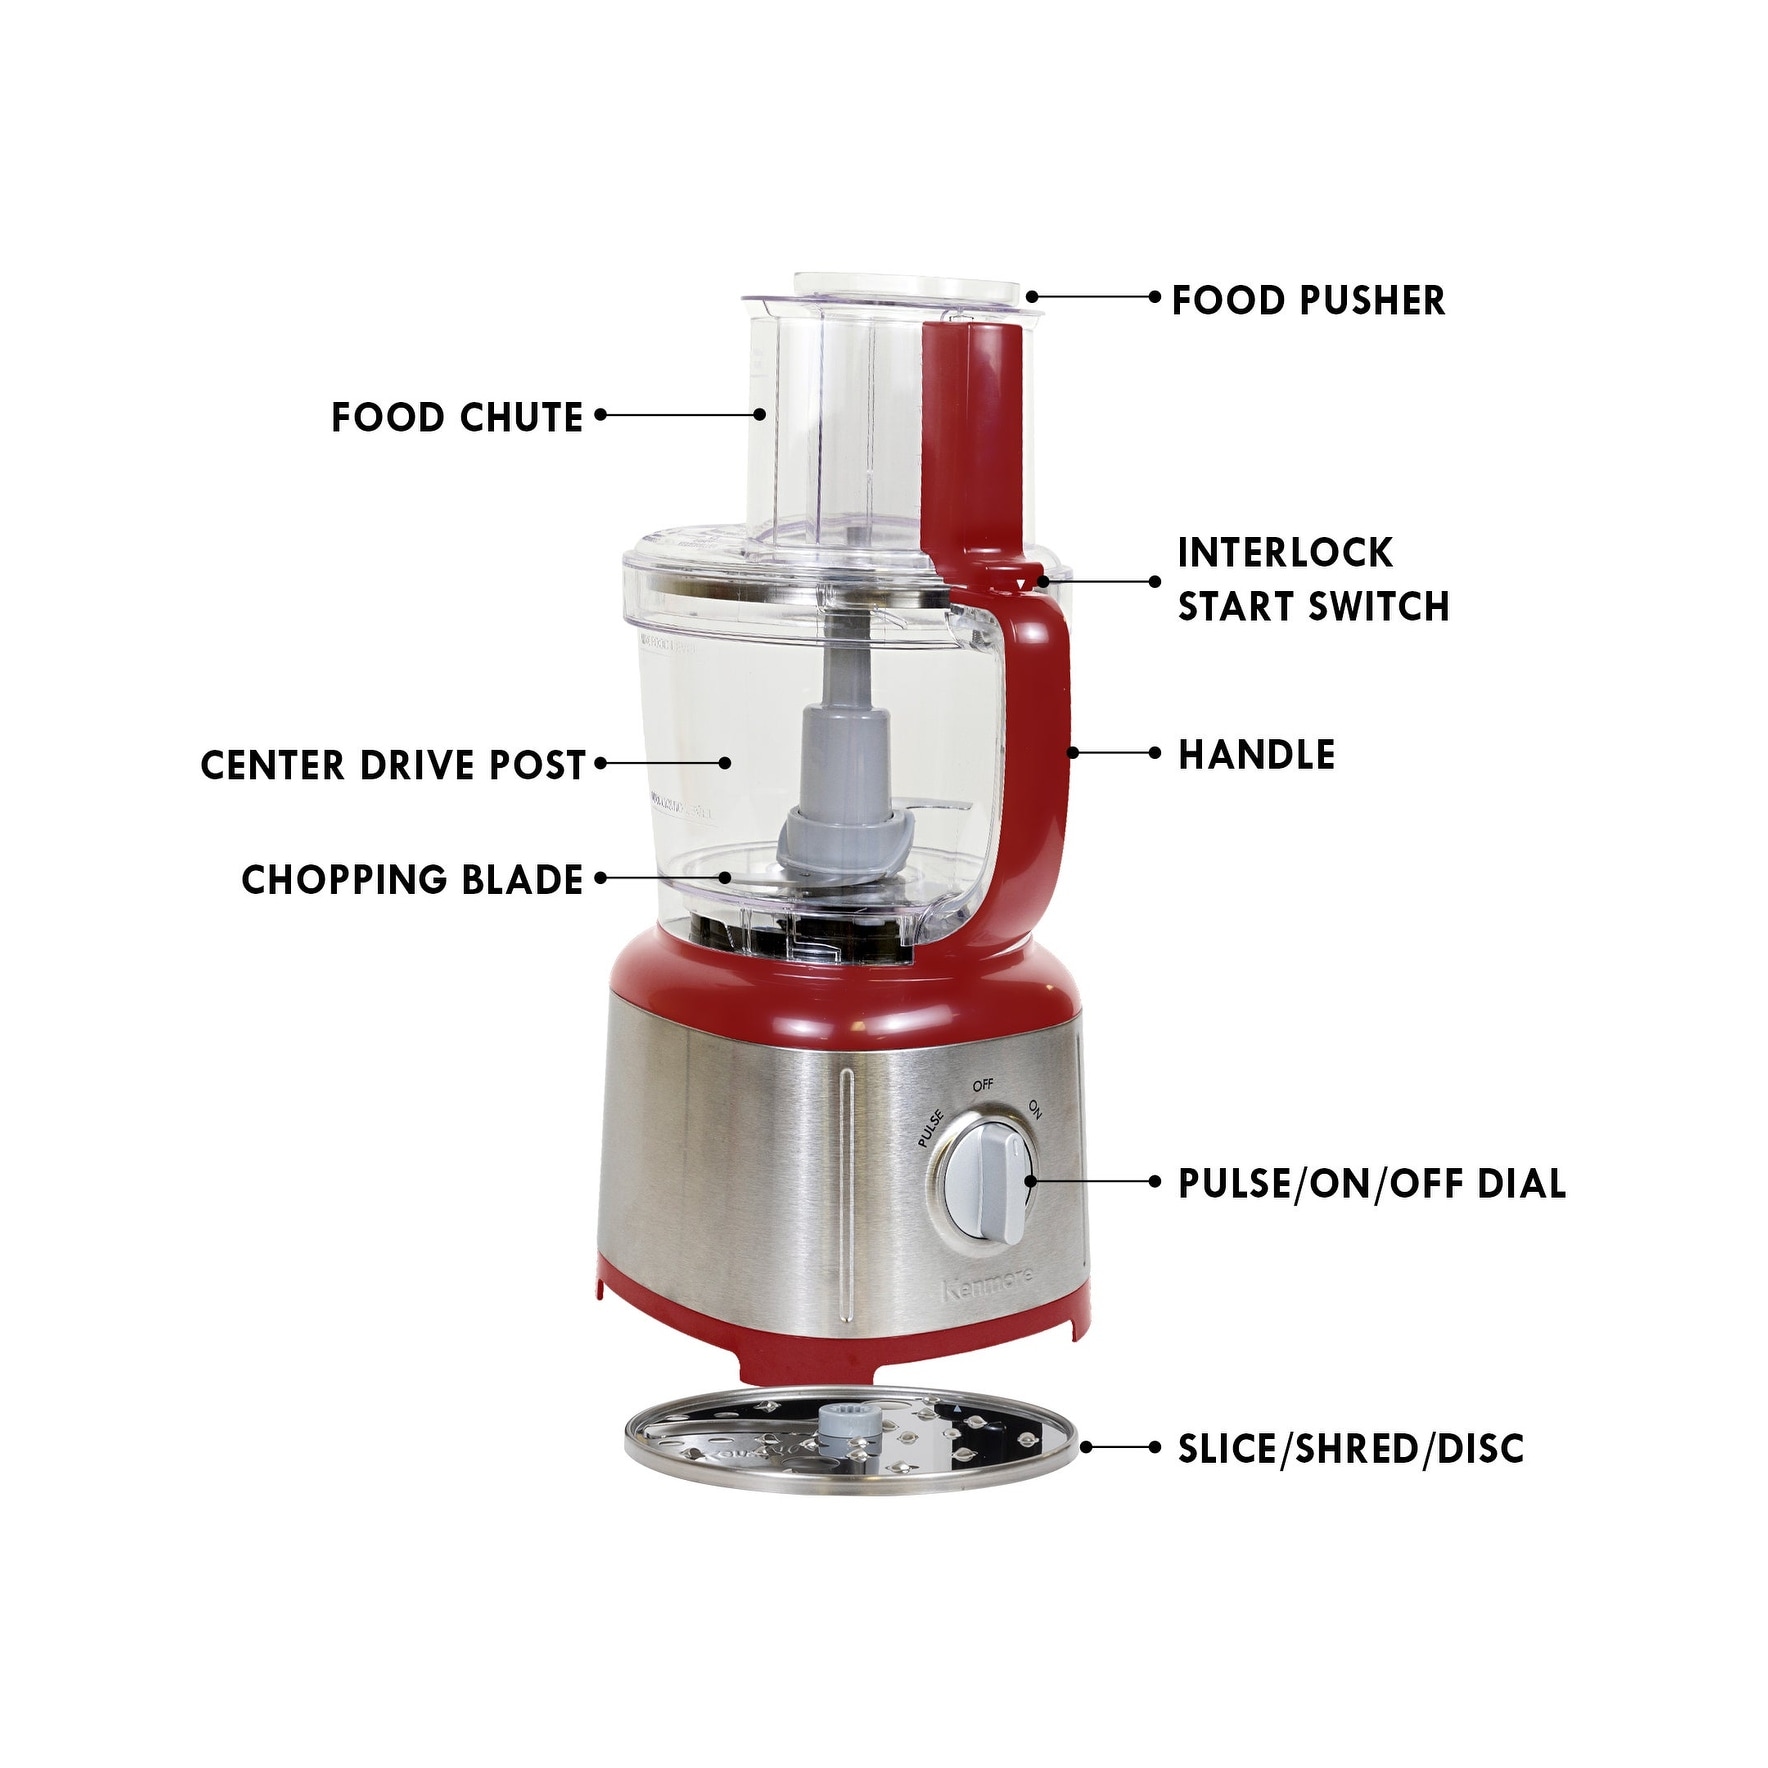 https://ak1.ostkcdn.com/images/products/is/images/direct/1d1c3fcc8afcb4583d866c4c74cf988f6e98943f/Kenmore-11-cup-Food-Processor---Red---414302.jpg